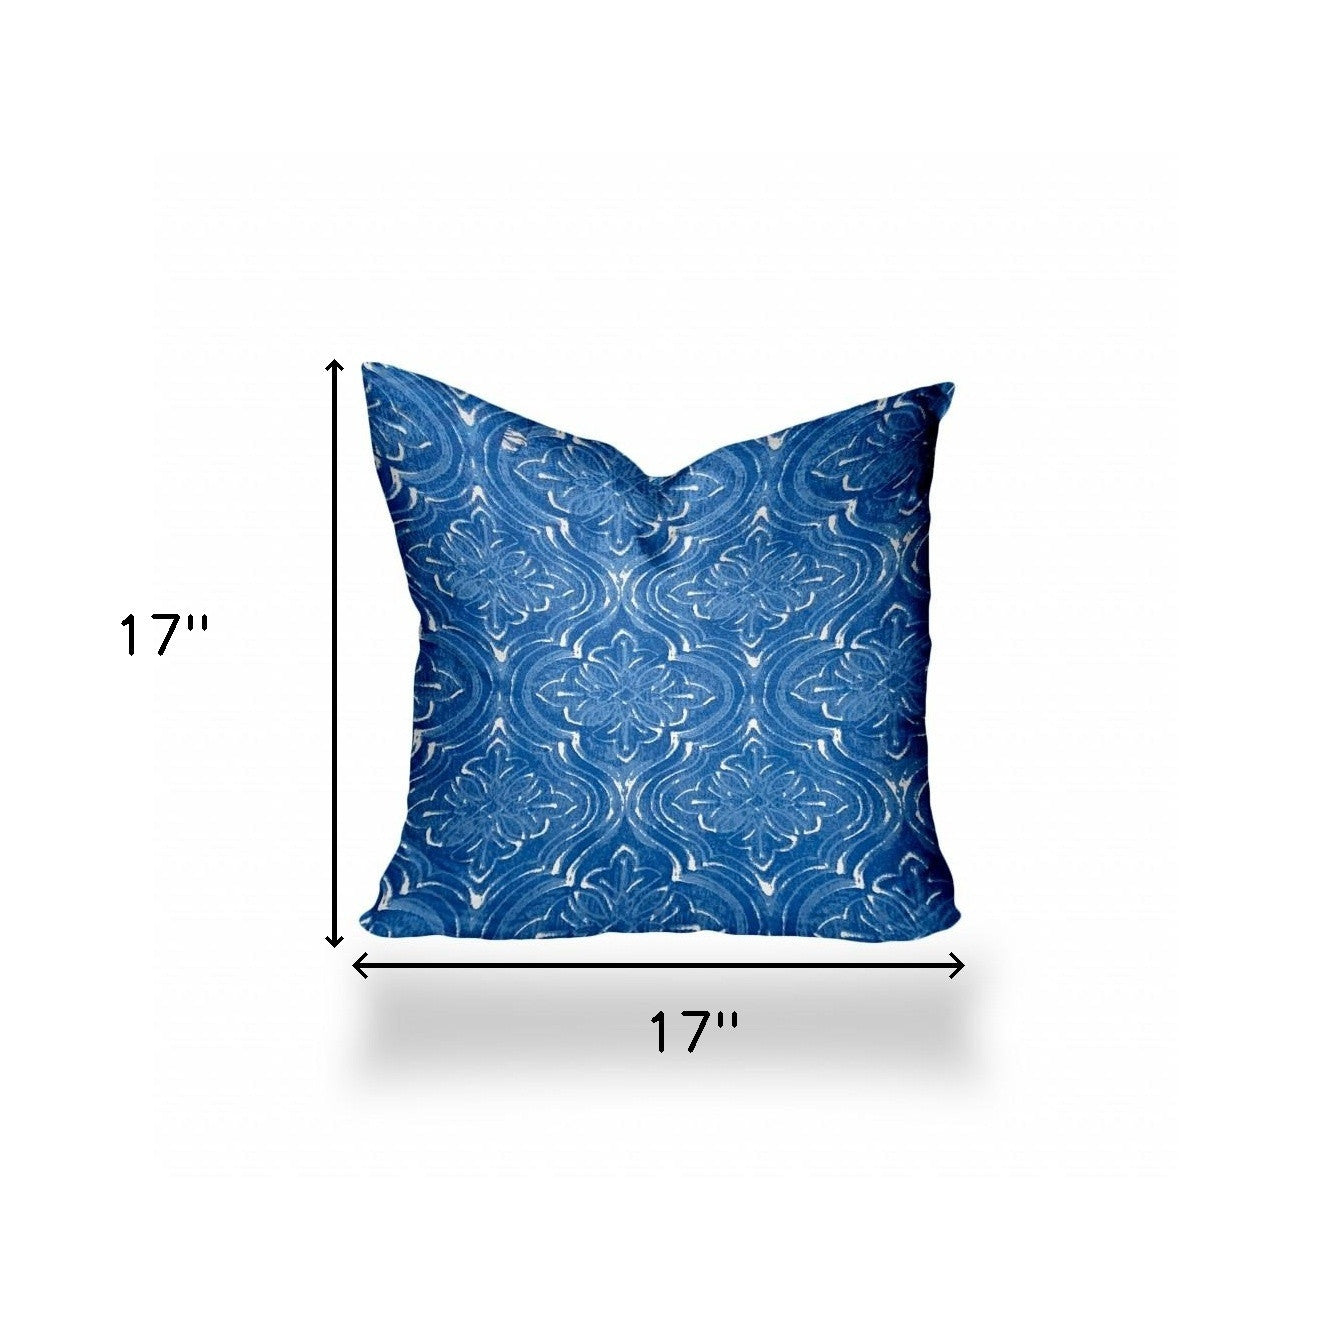 17" X 17" Blue And White Enveloped Ikat Throw Indoor Outdoor Pillow